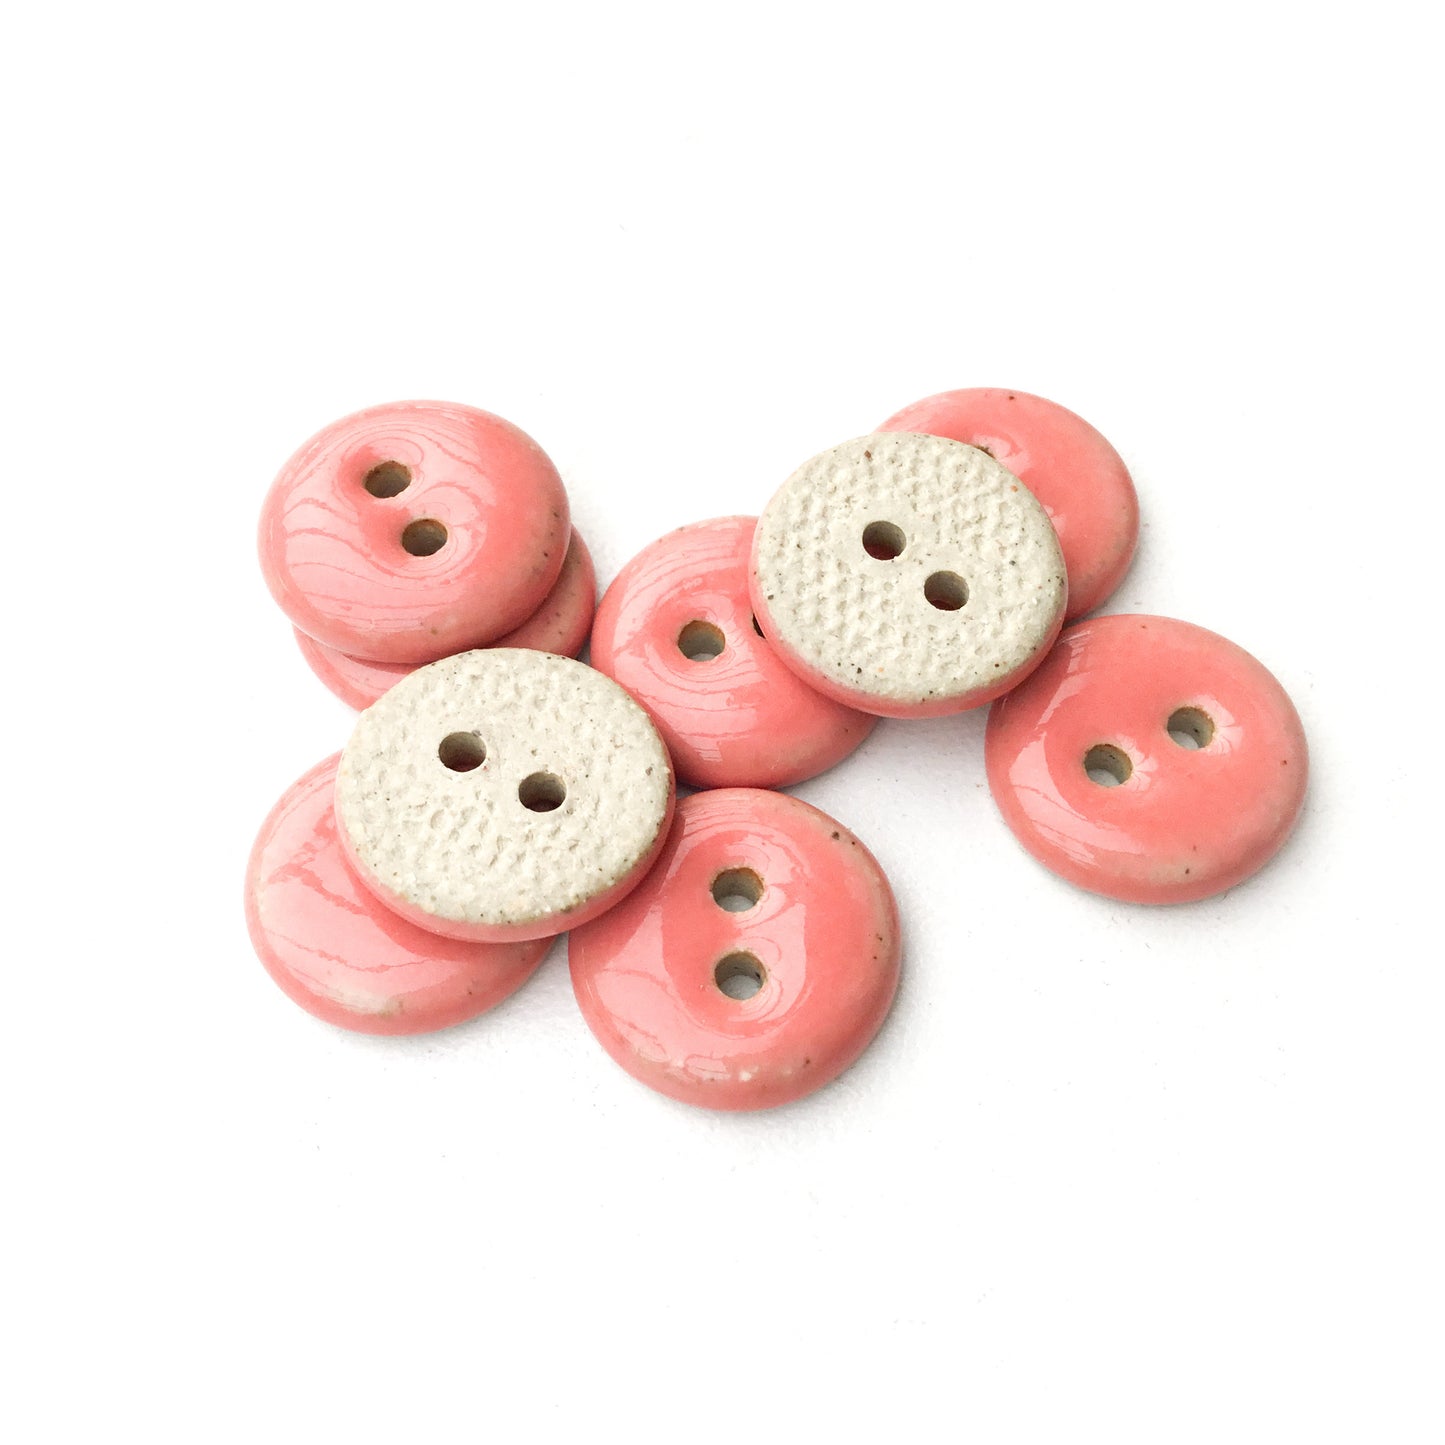 Coral Ceramic Buttons - Coral Stoneware Buttons - 9/16" - 9 Pack